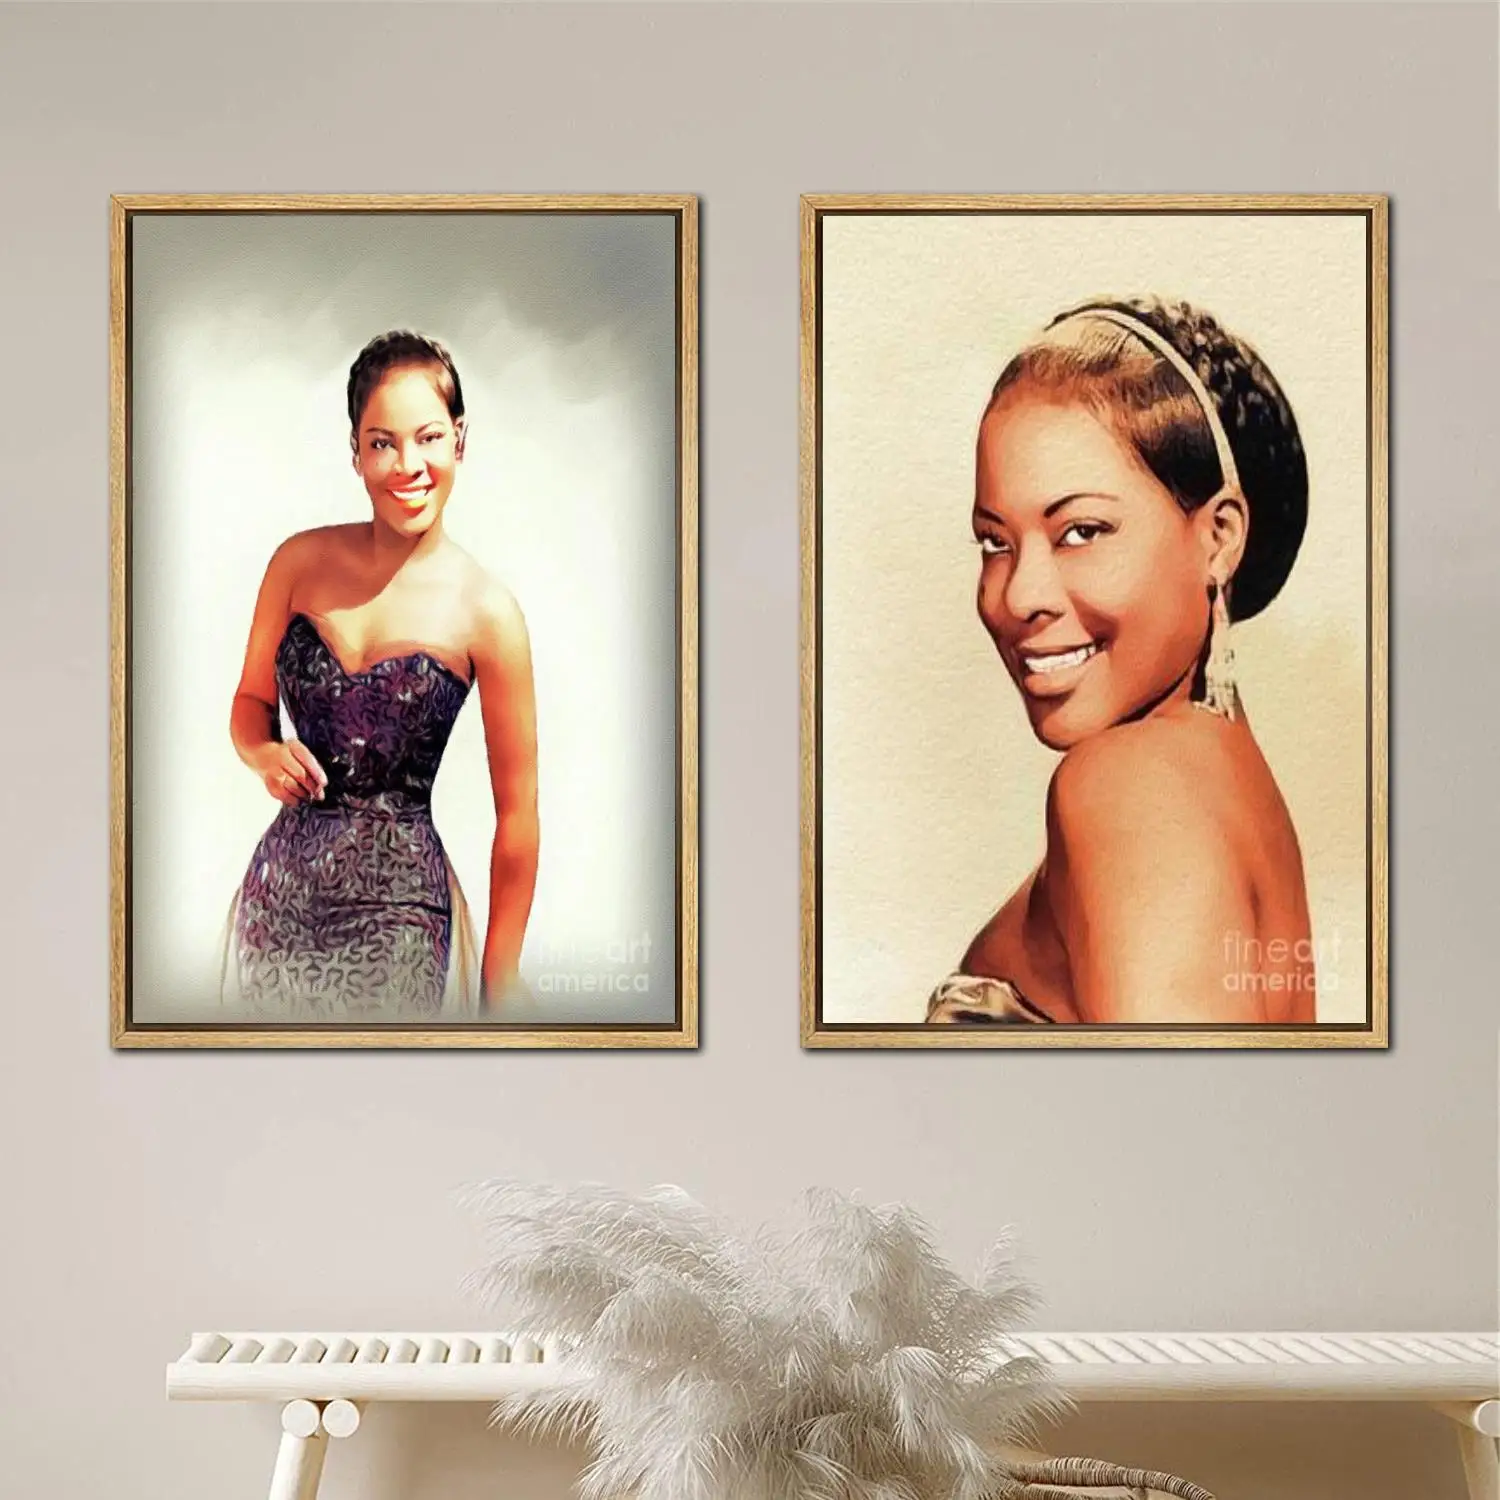 LaVern Baker Poster Painting 24x36 Wall Art Canvas Posters room decor Modern Family bedroom Decoration Art wall decor